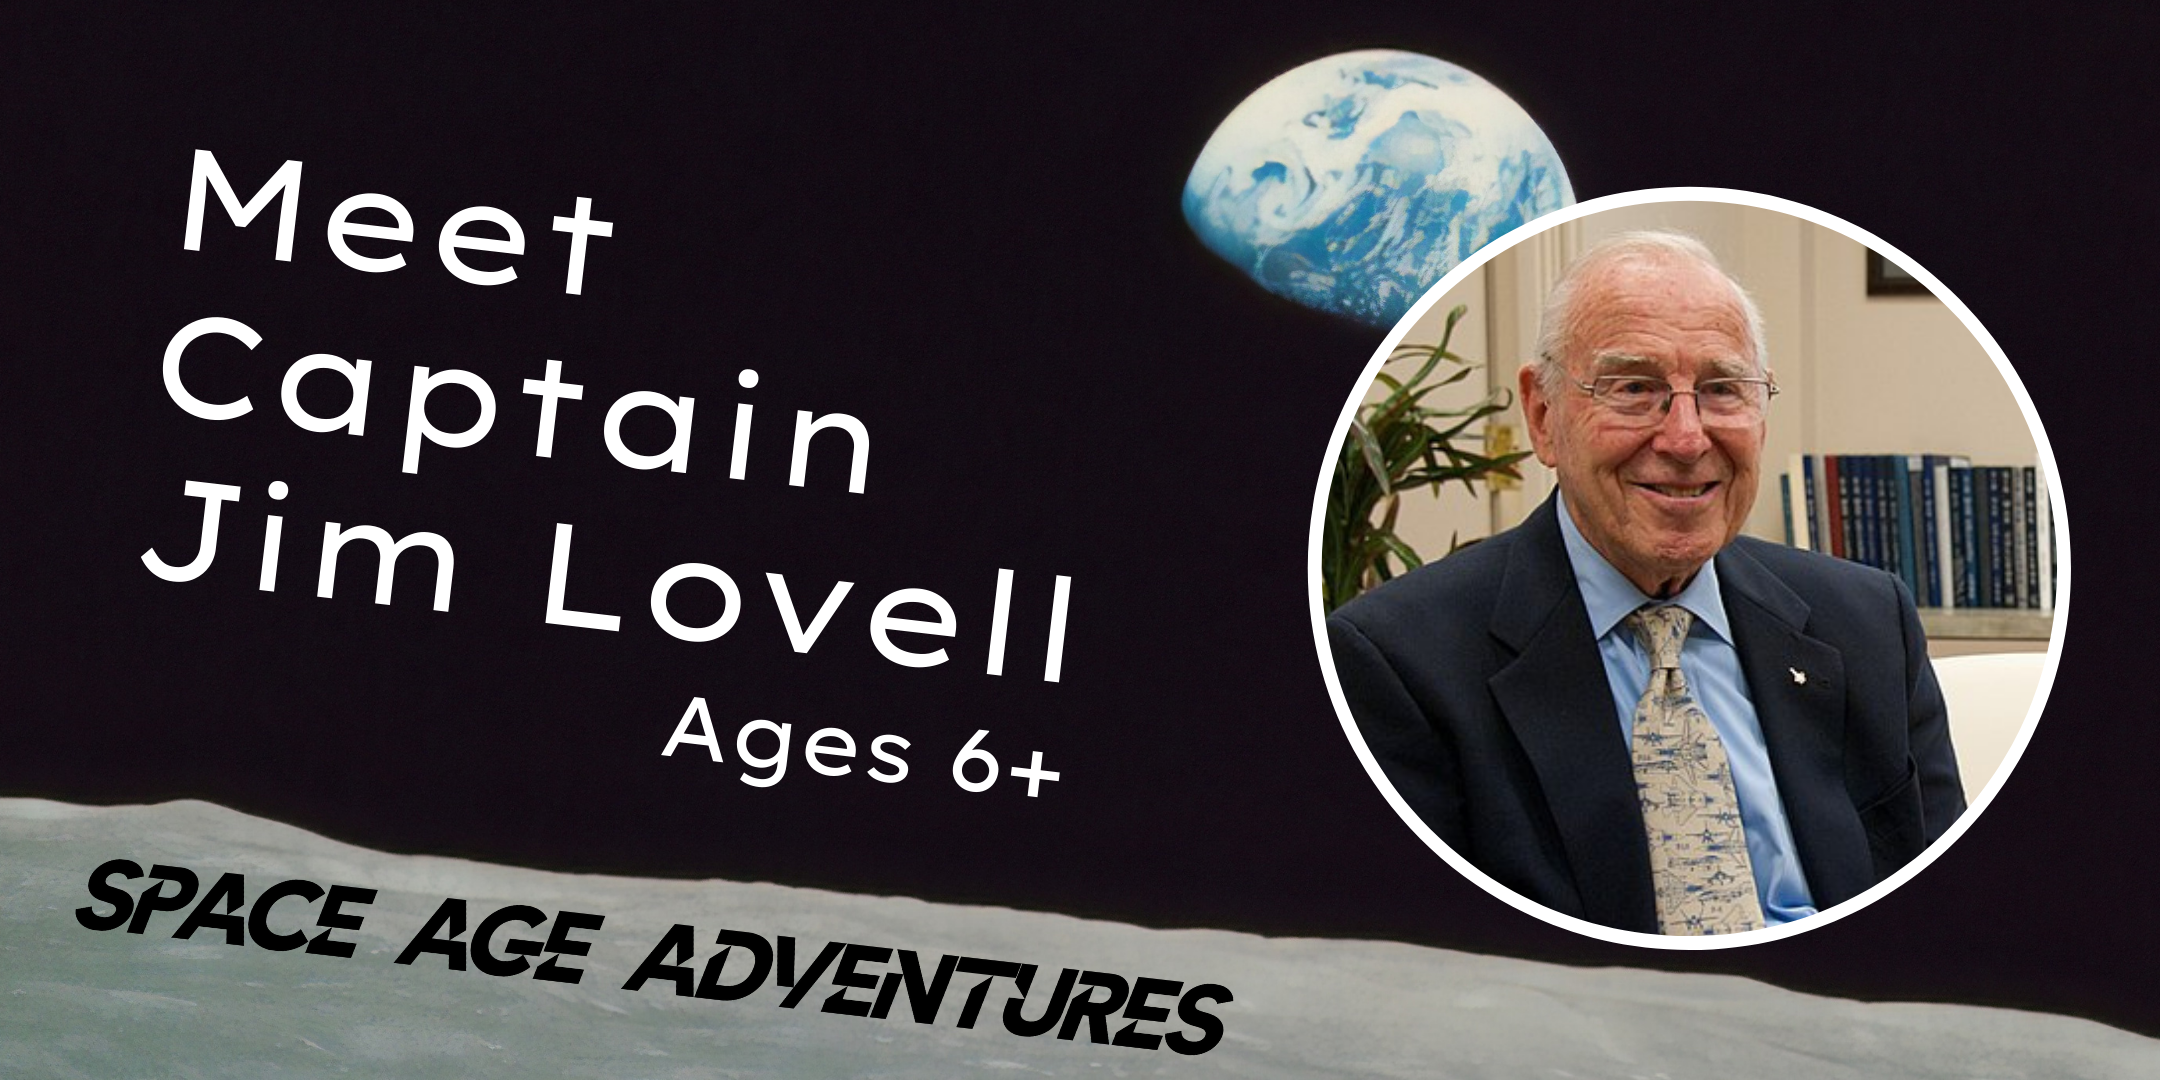 Image of "Space Age Adventures: Meet Captain Jim Lovell for Ages 6+"